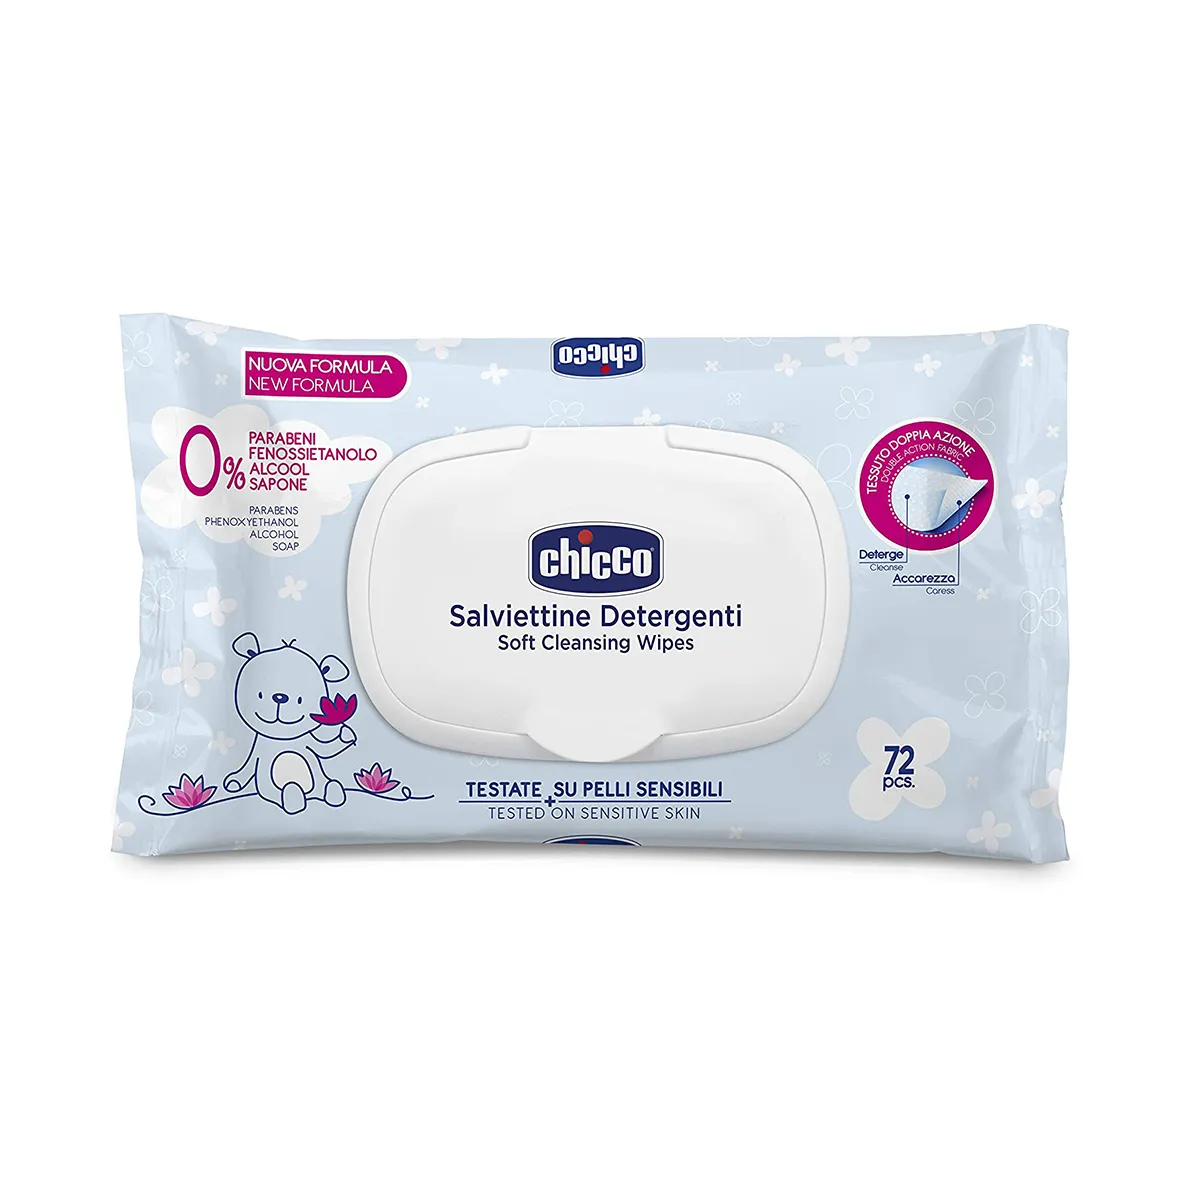 CHICCO WIPES 72 PCS WITH FLIP COVER